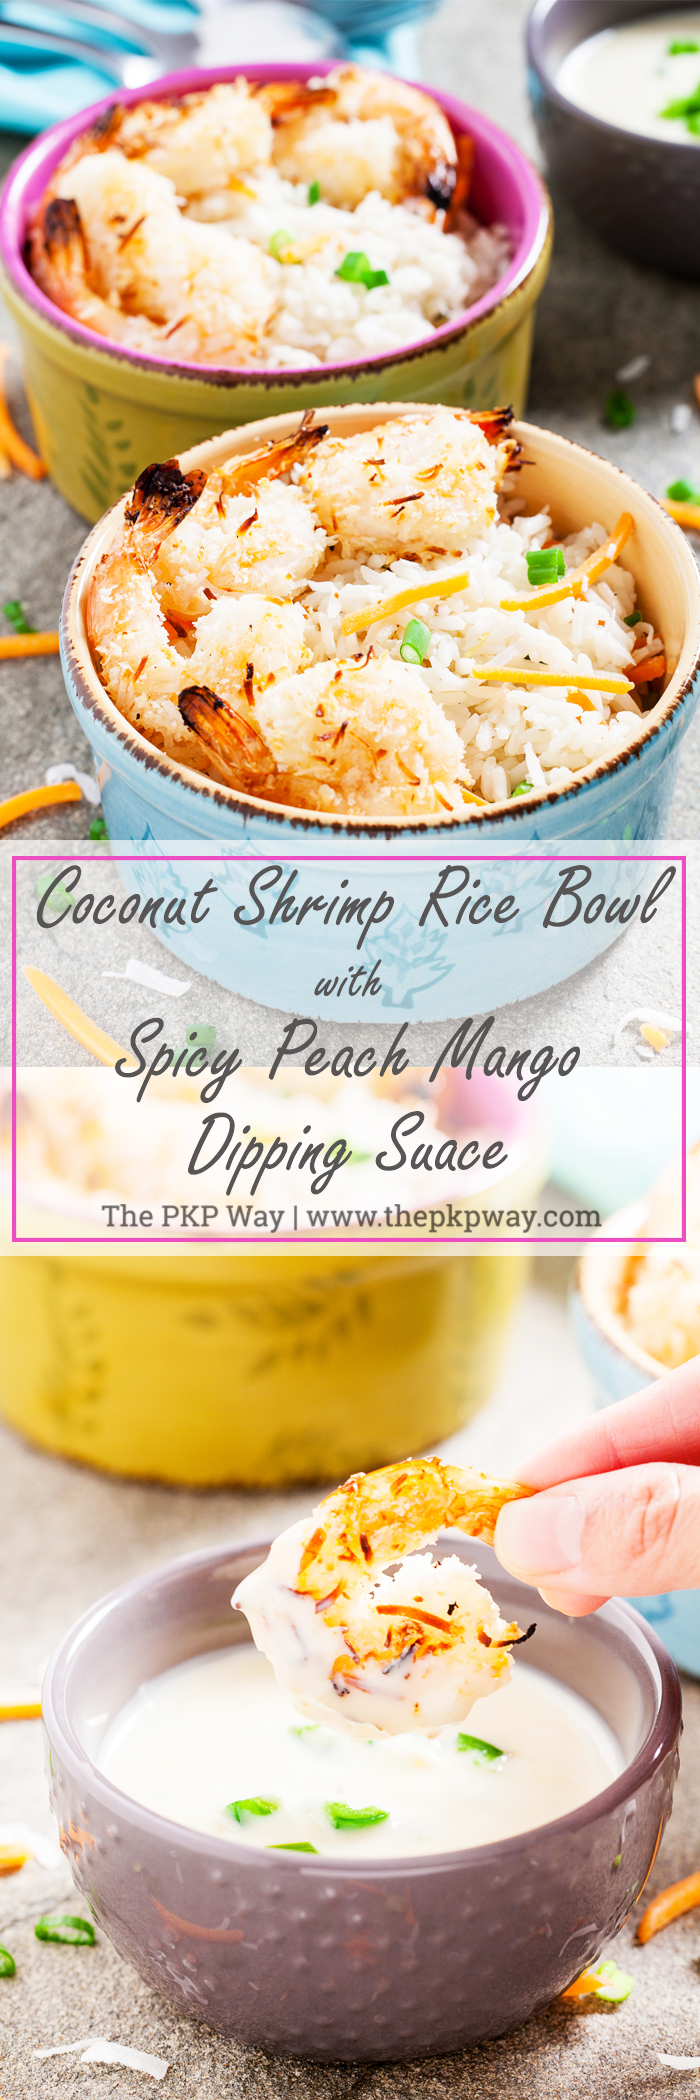 Try these Coconut Shrimp Rice Bowls with Spicy Peach and Mango Dipping Sauce for a scrumptious, satisfying, and dairy-free dinner.